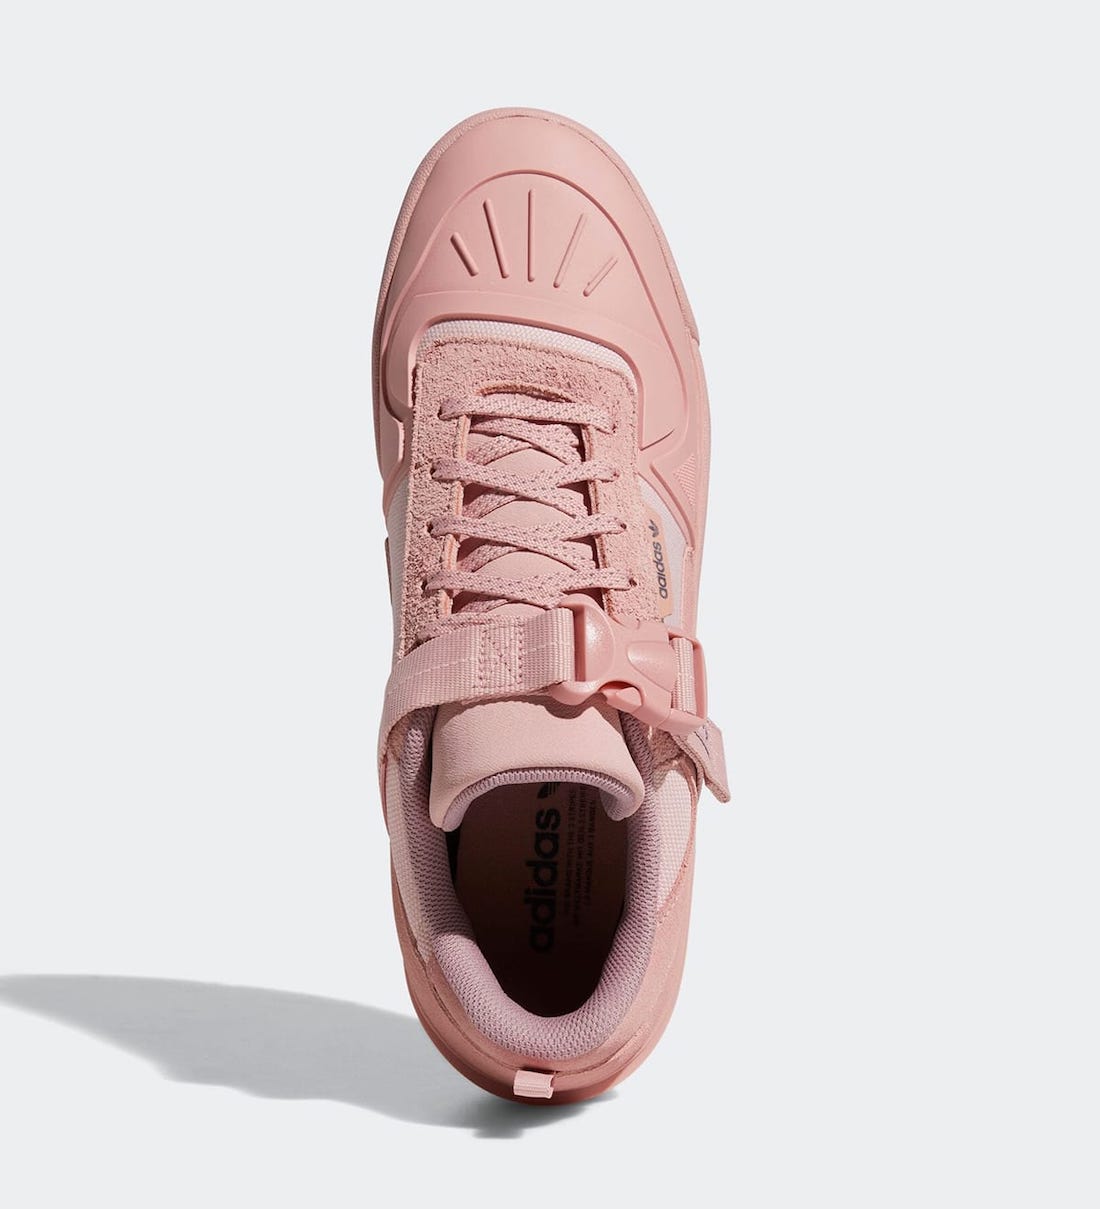 adidas Forum Low Gore-Tex Pink GW5923 Release Date